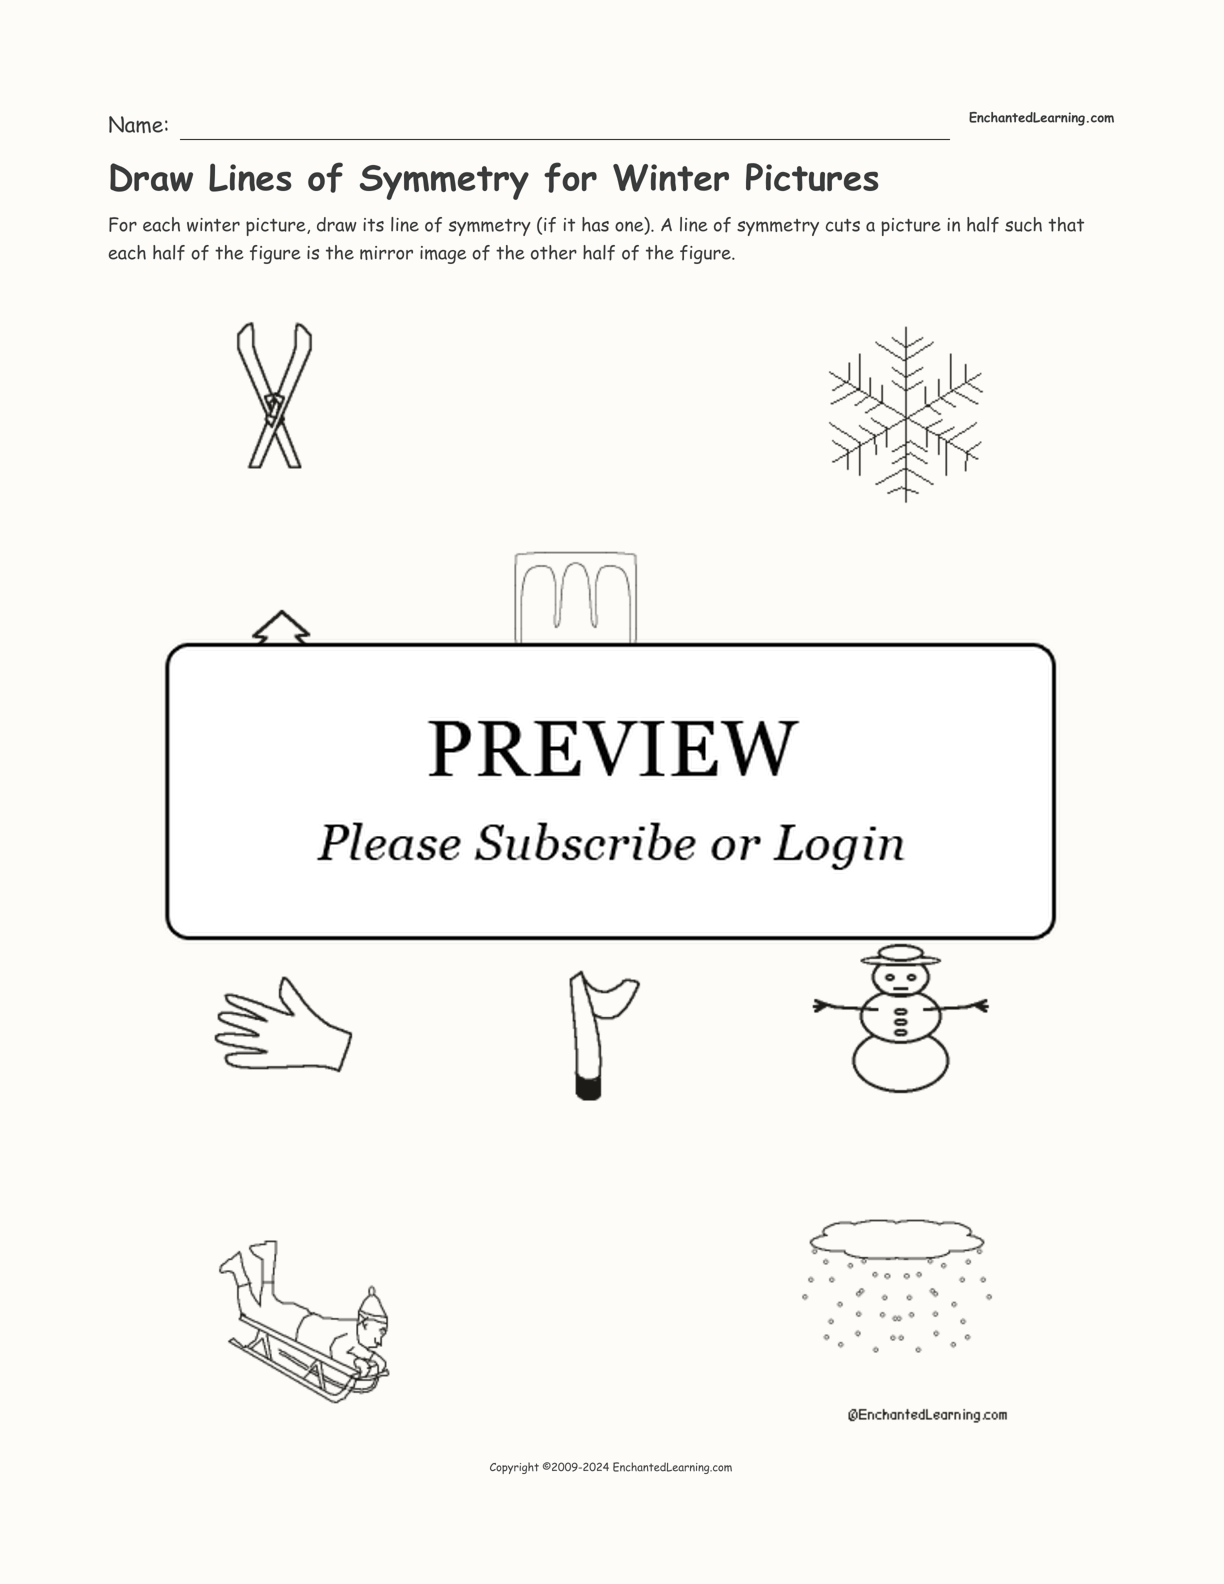 Draw Lines of Symmetry for Winter Pictures interactive worksheet page 1